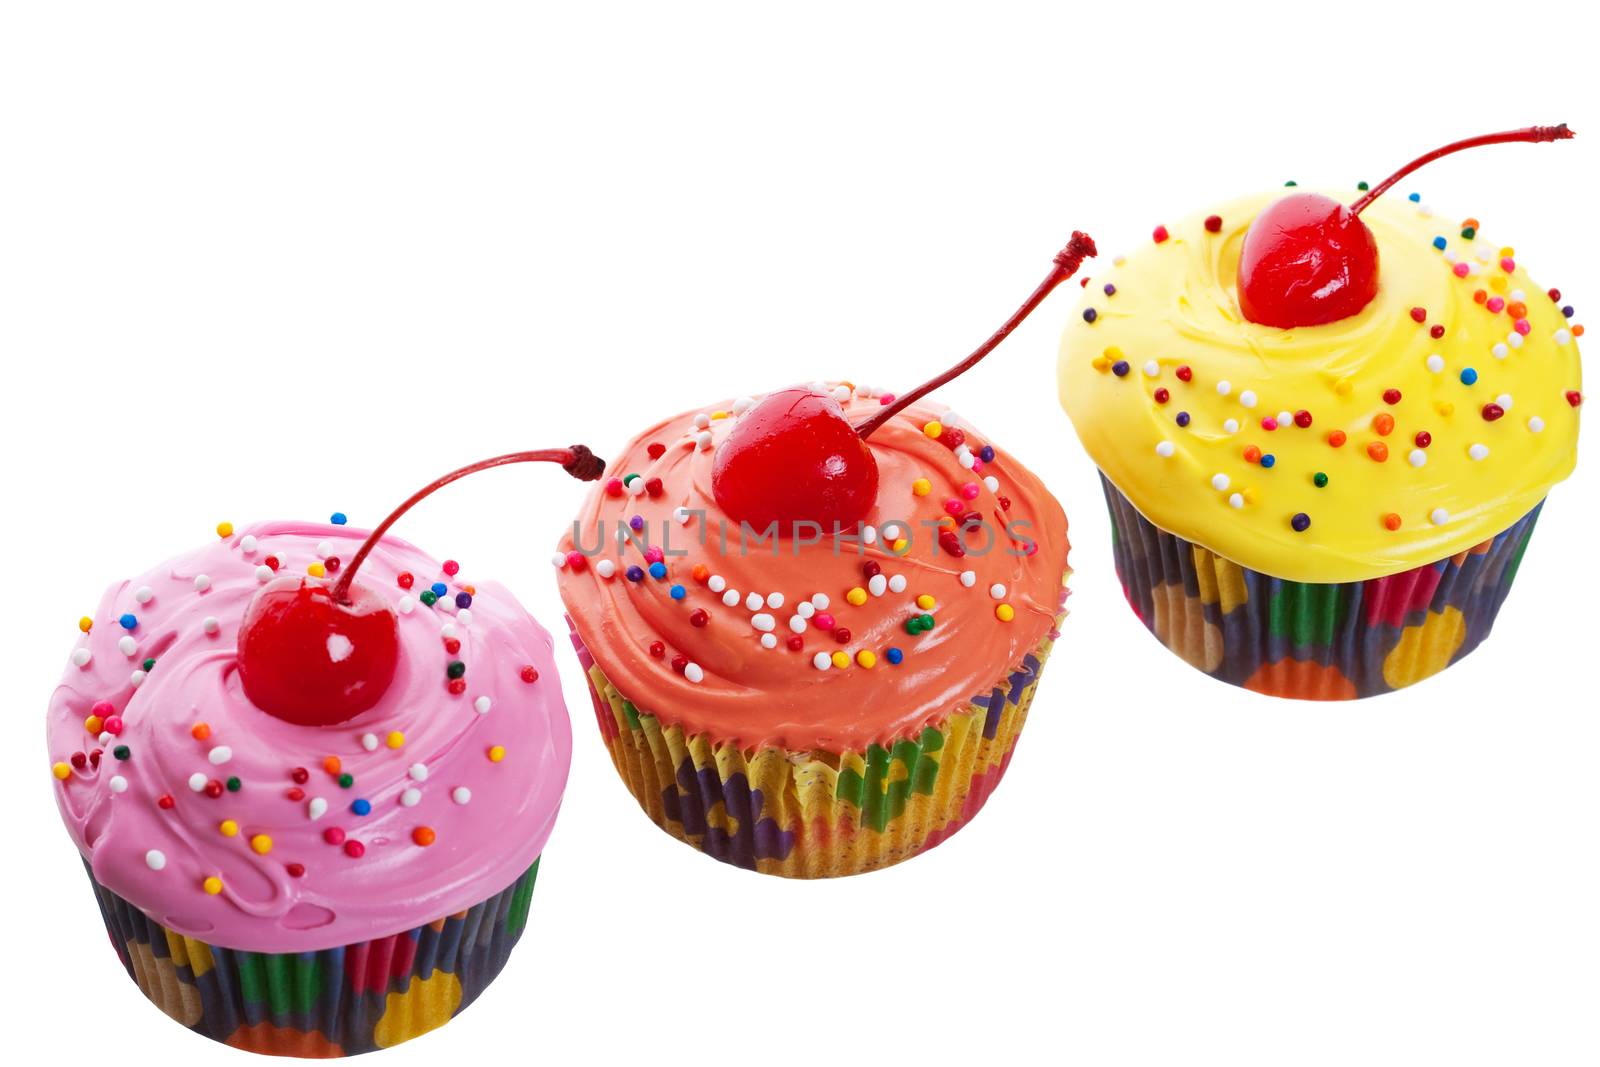 Three colorful, mouth-watering cherry cupcakes.  Shot on white background.